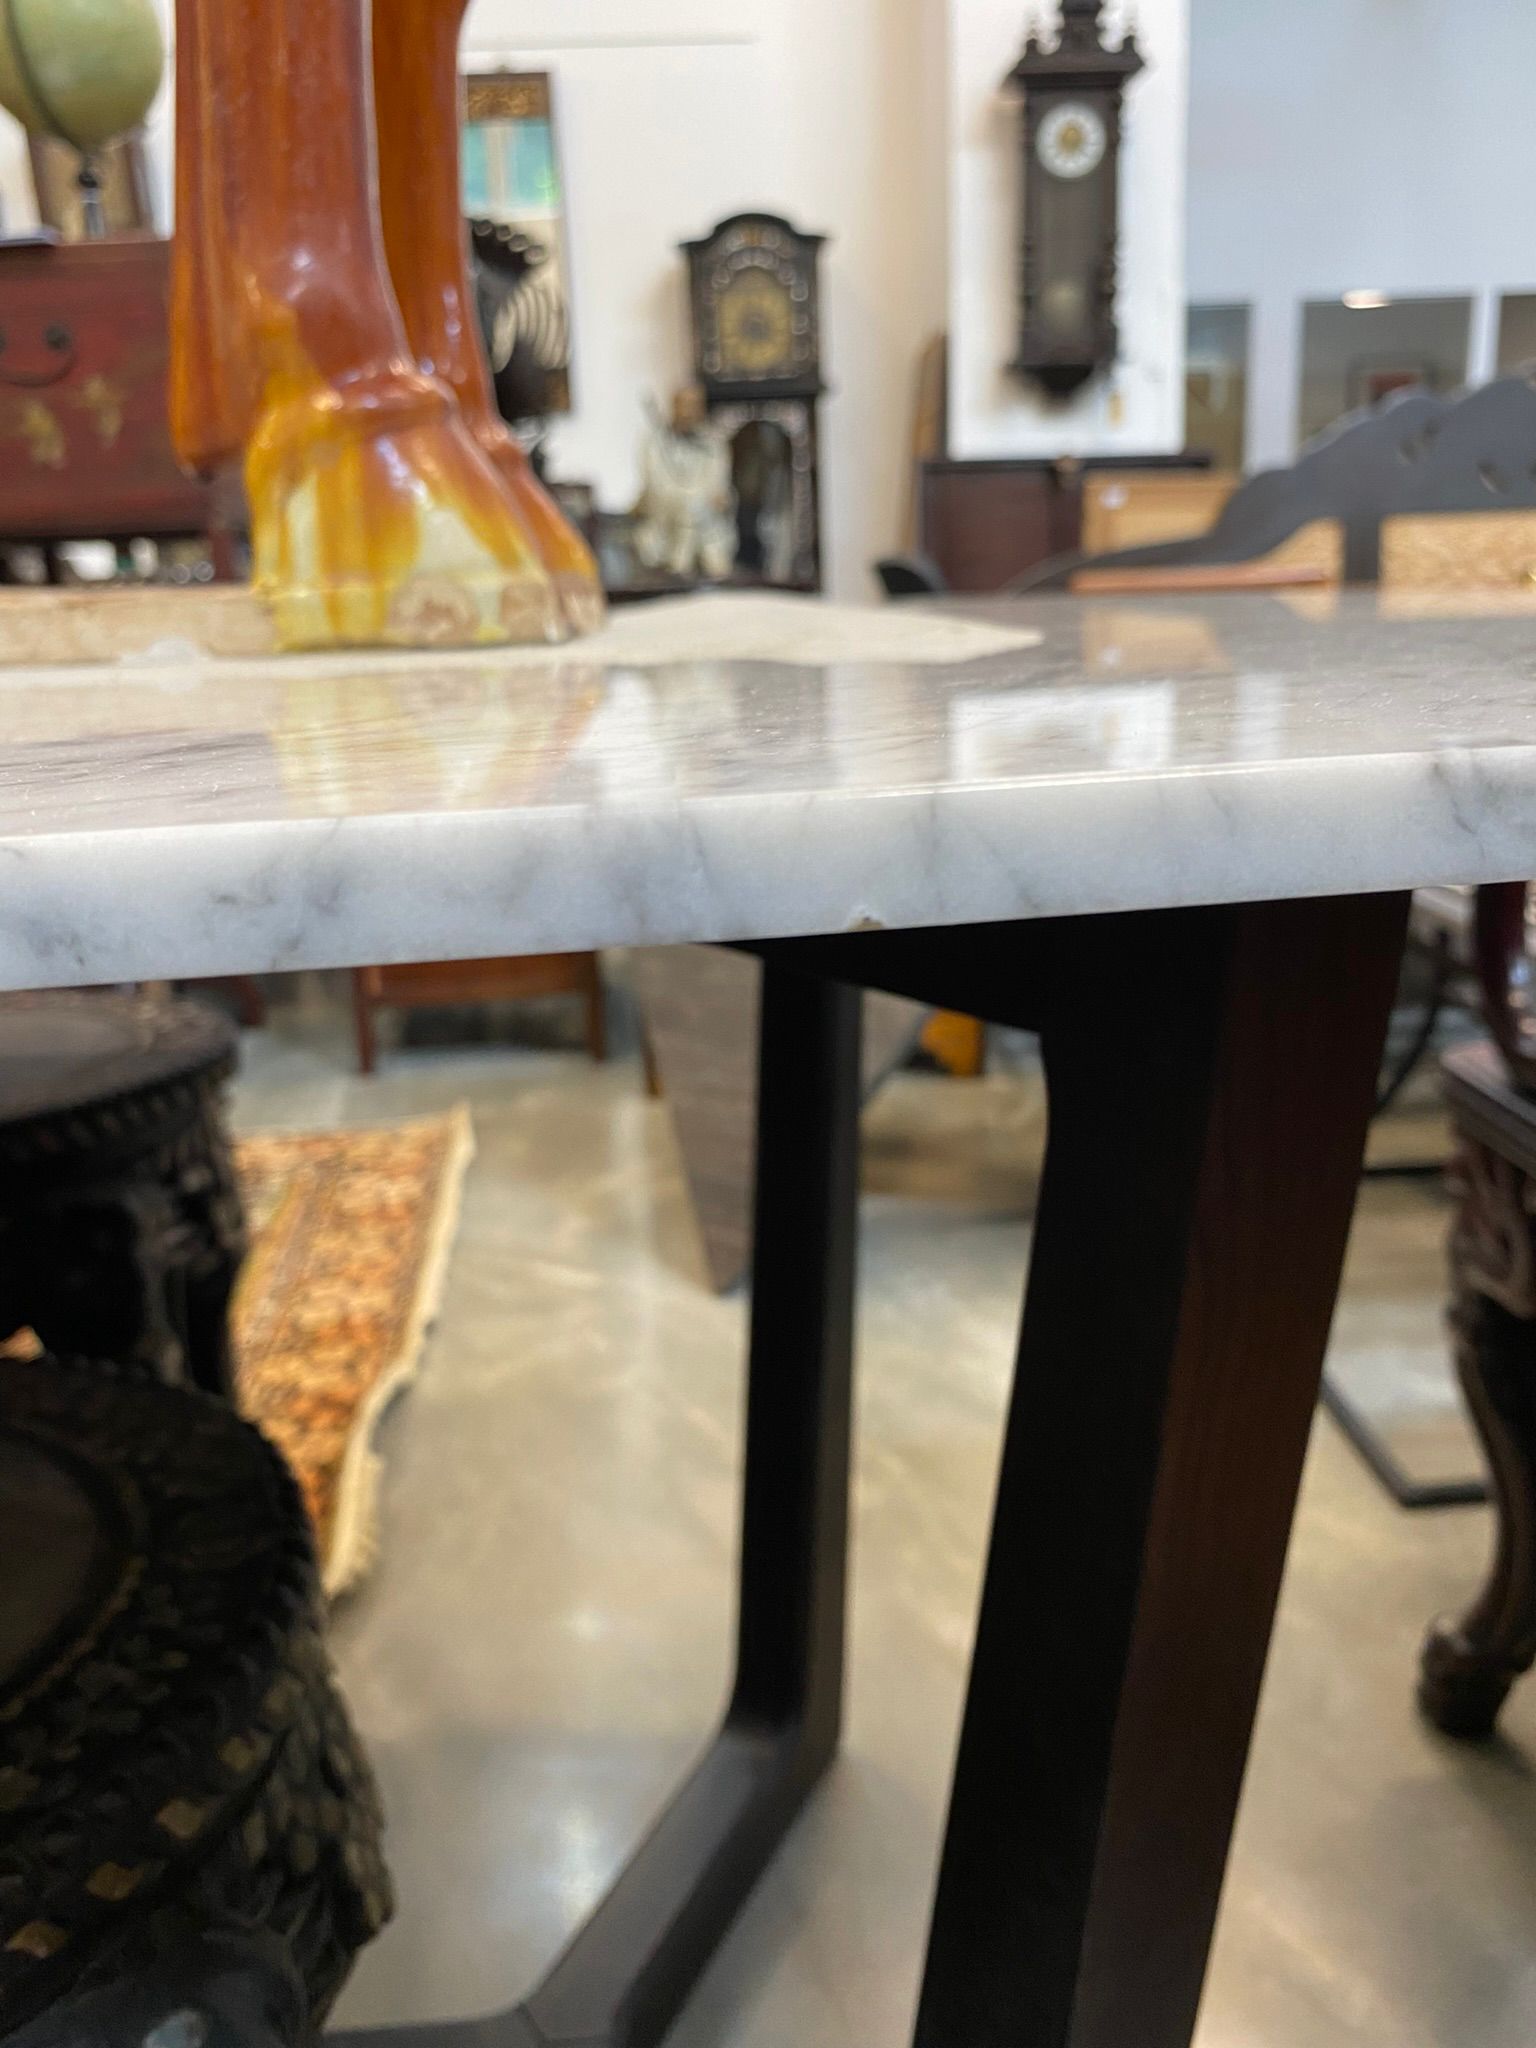 A POLIFORM 'CONCORDE' MARBLE TOPPED DINING TABLE - Image 8 of 8